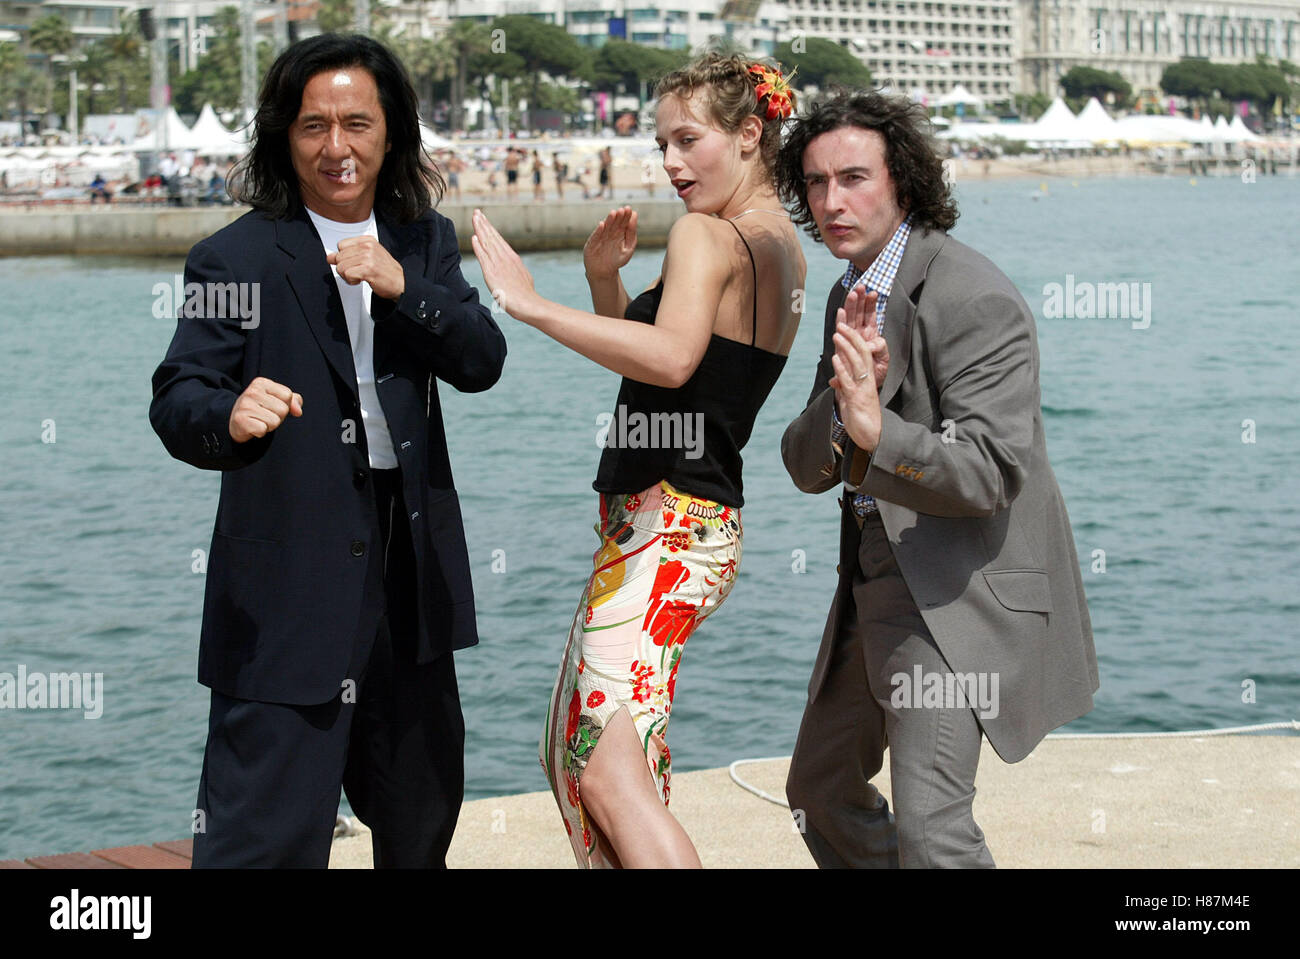 JACKIE CHAN CECILE DE FRANCE & STEVE COOGAN ON THE HOTEL MARTINEZ PIER TO PROMOTE THEIR NEW MOVIE AROUND THE WORLD IN 80 DAYS C Stock Photo